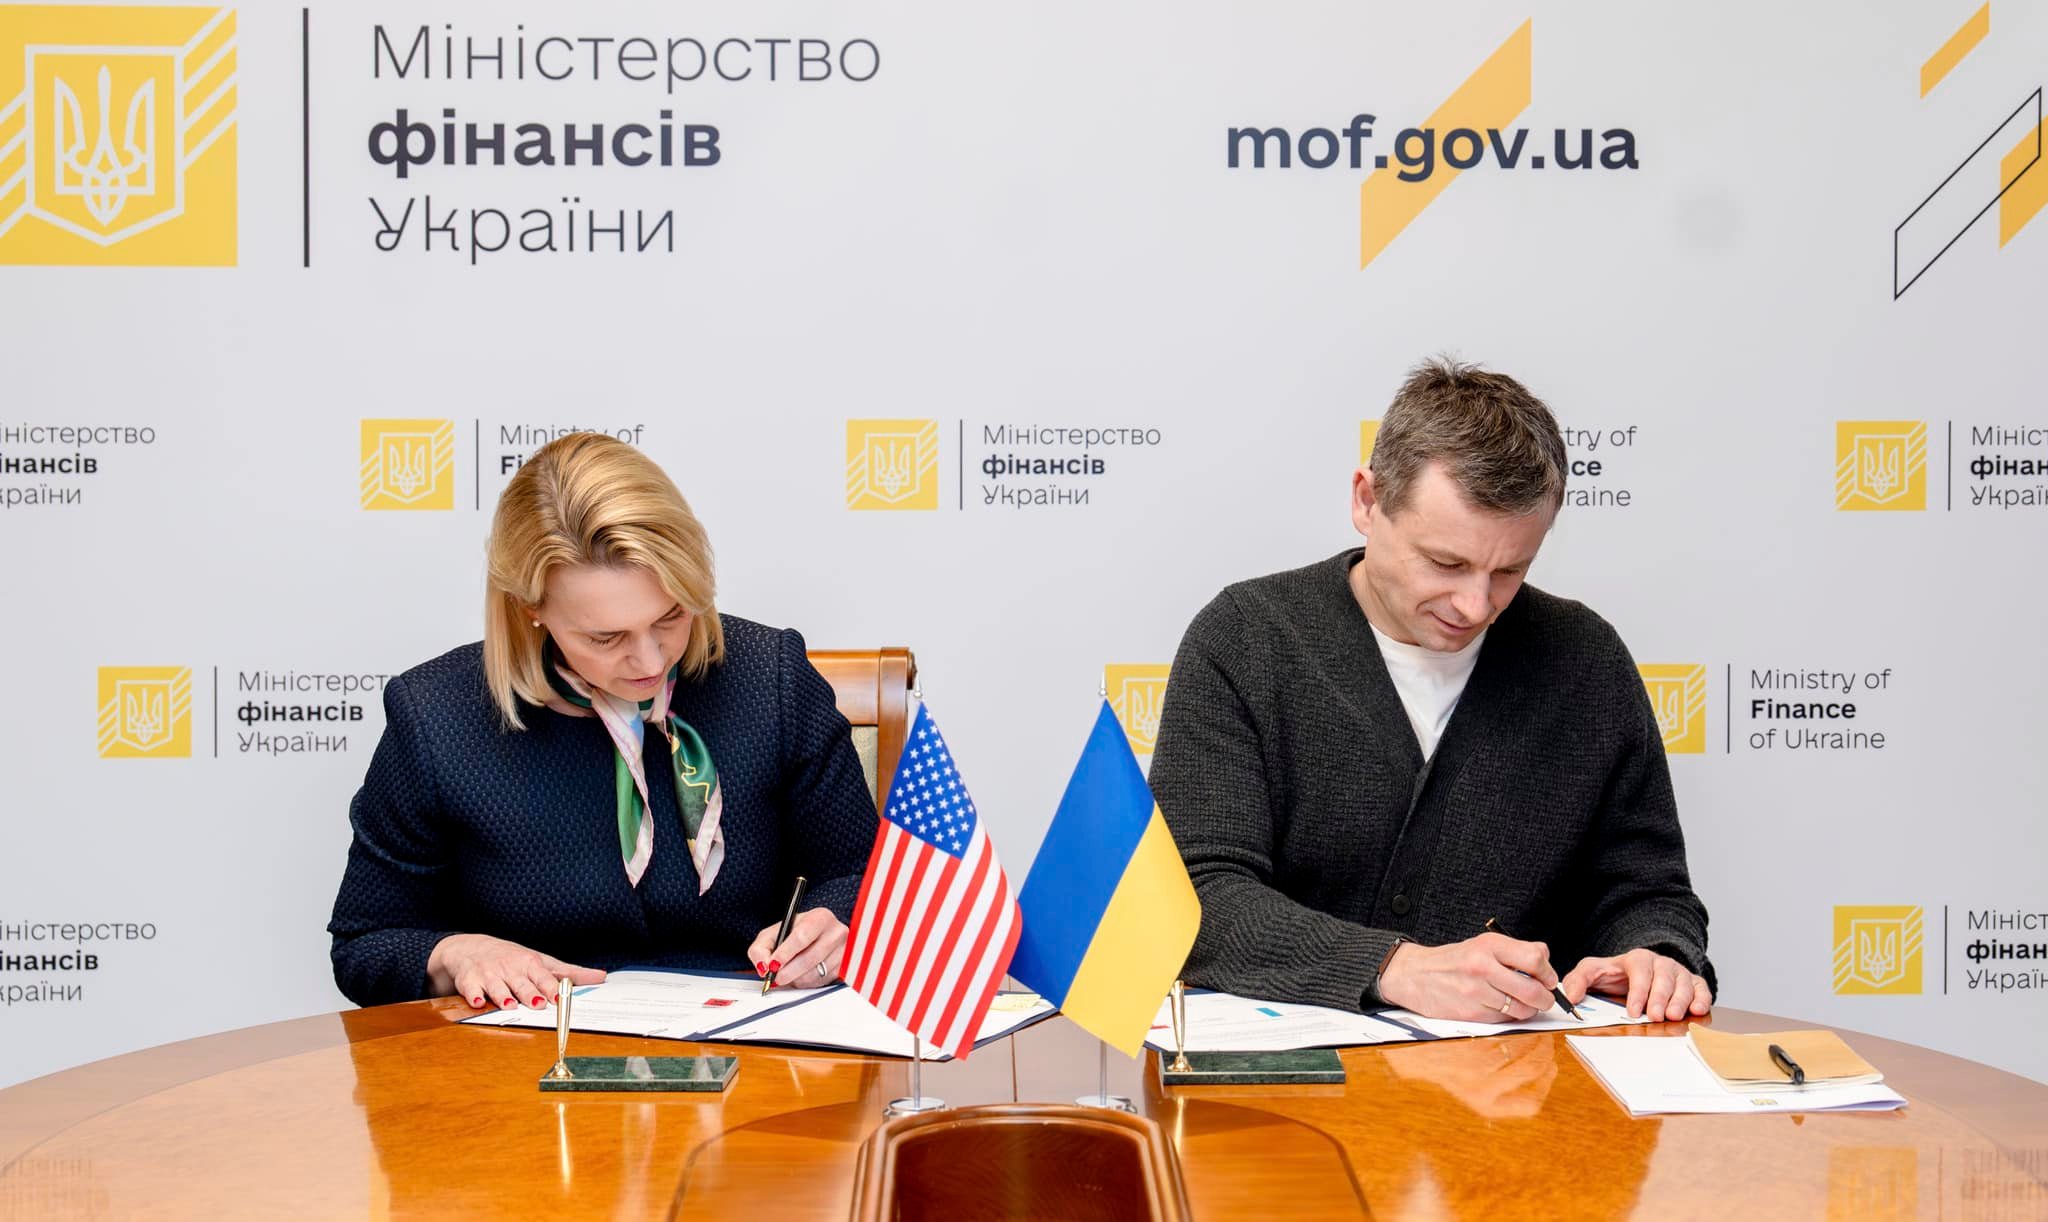 Minister of Finance of Ukraine has signed an Agreement with the United States regarding the deferral of payments on the state debt